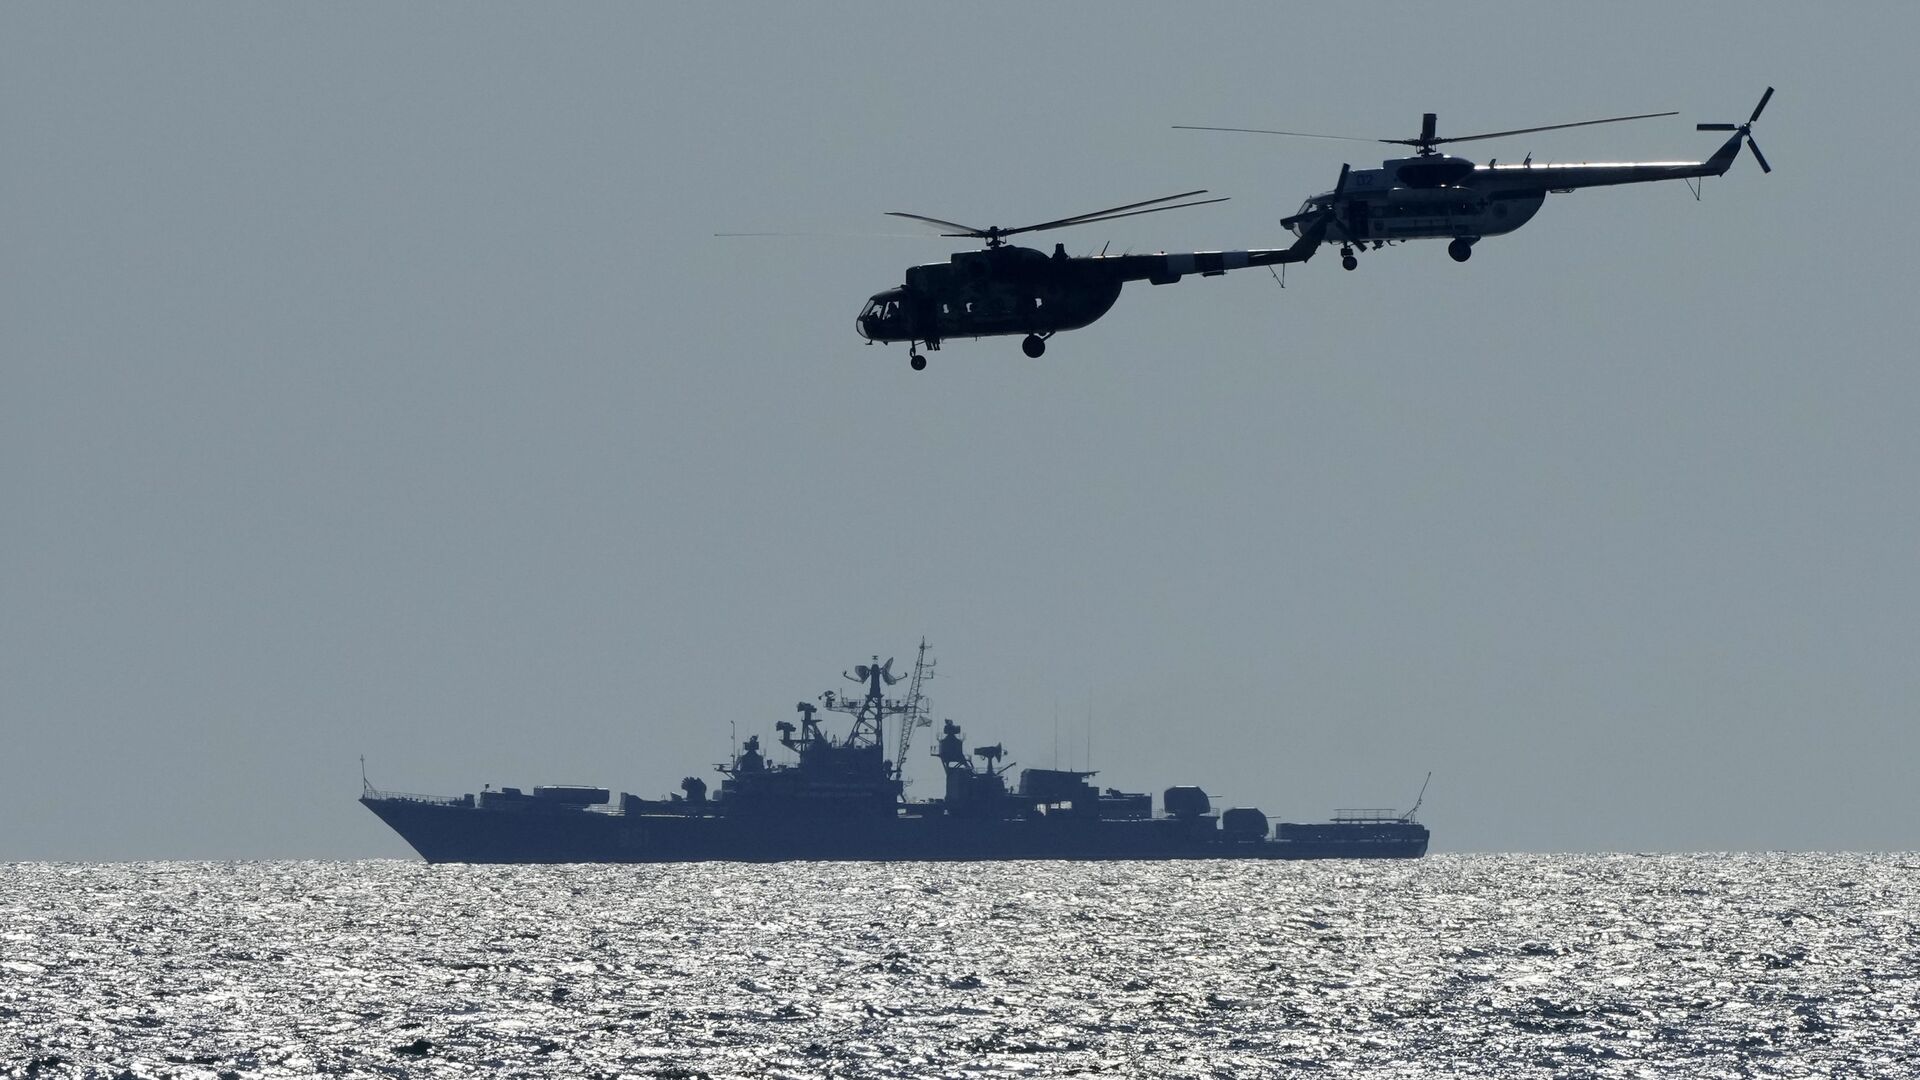 Ukrainian helicopters fly over a Russian warship  during Sea Breeze 2021 maneuvers, in the Black Sea, Friday, July 9, 2021 - Sputnik International, 1920, 22.11.2021